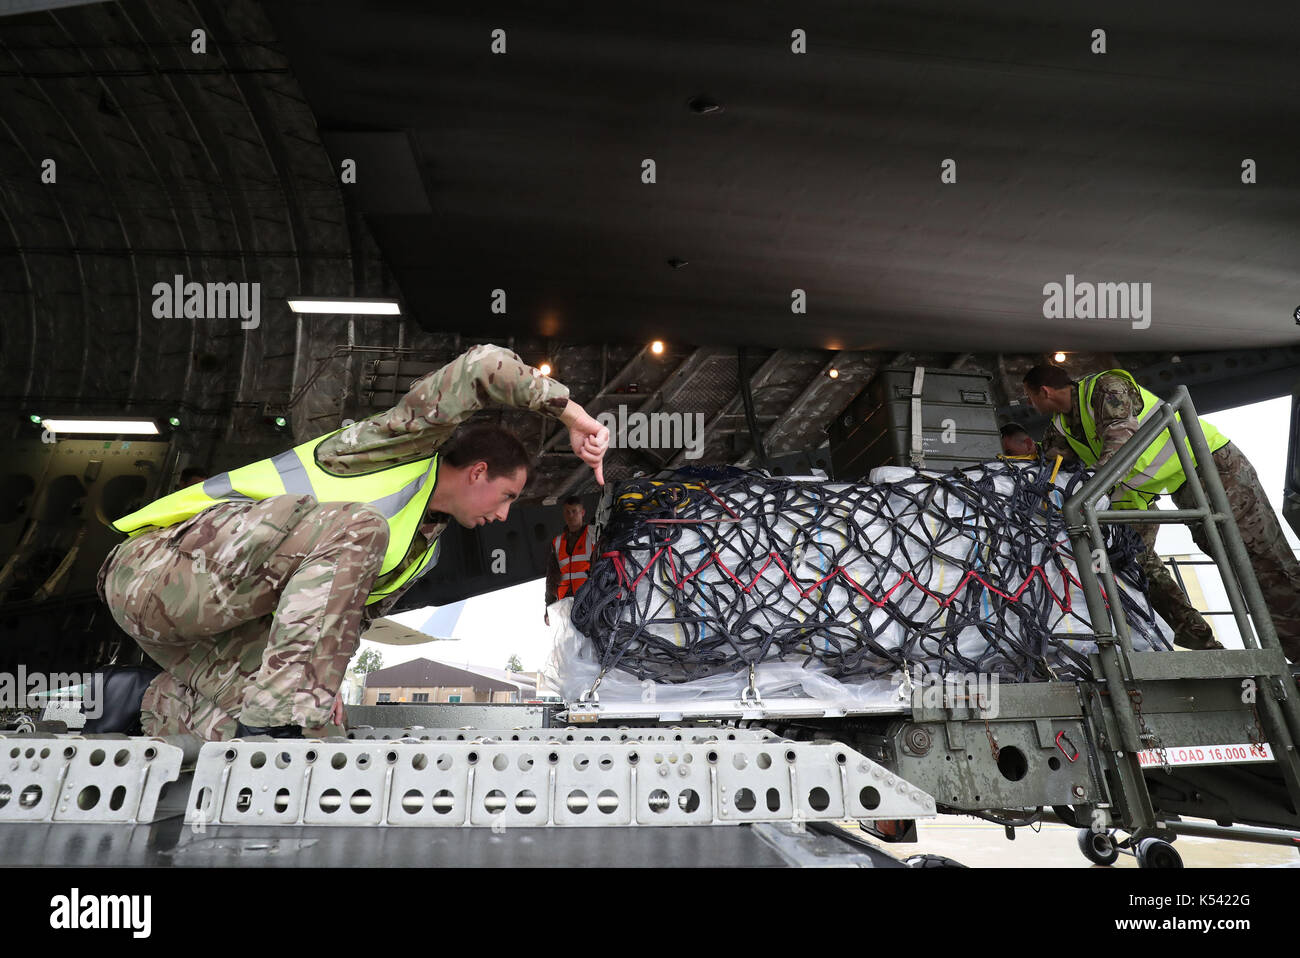 Dfid aid is loaded onto a Royal Air Force C-17 Globemaster III aircraft at Brize Norton, Oxfordshire, before it is flown to the areas affected by Hurricane Irma as winds of up to 175mph left death and destruction in the Atlantic. Stock Photo